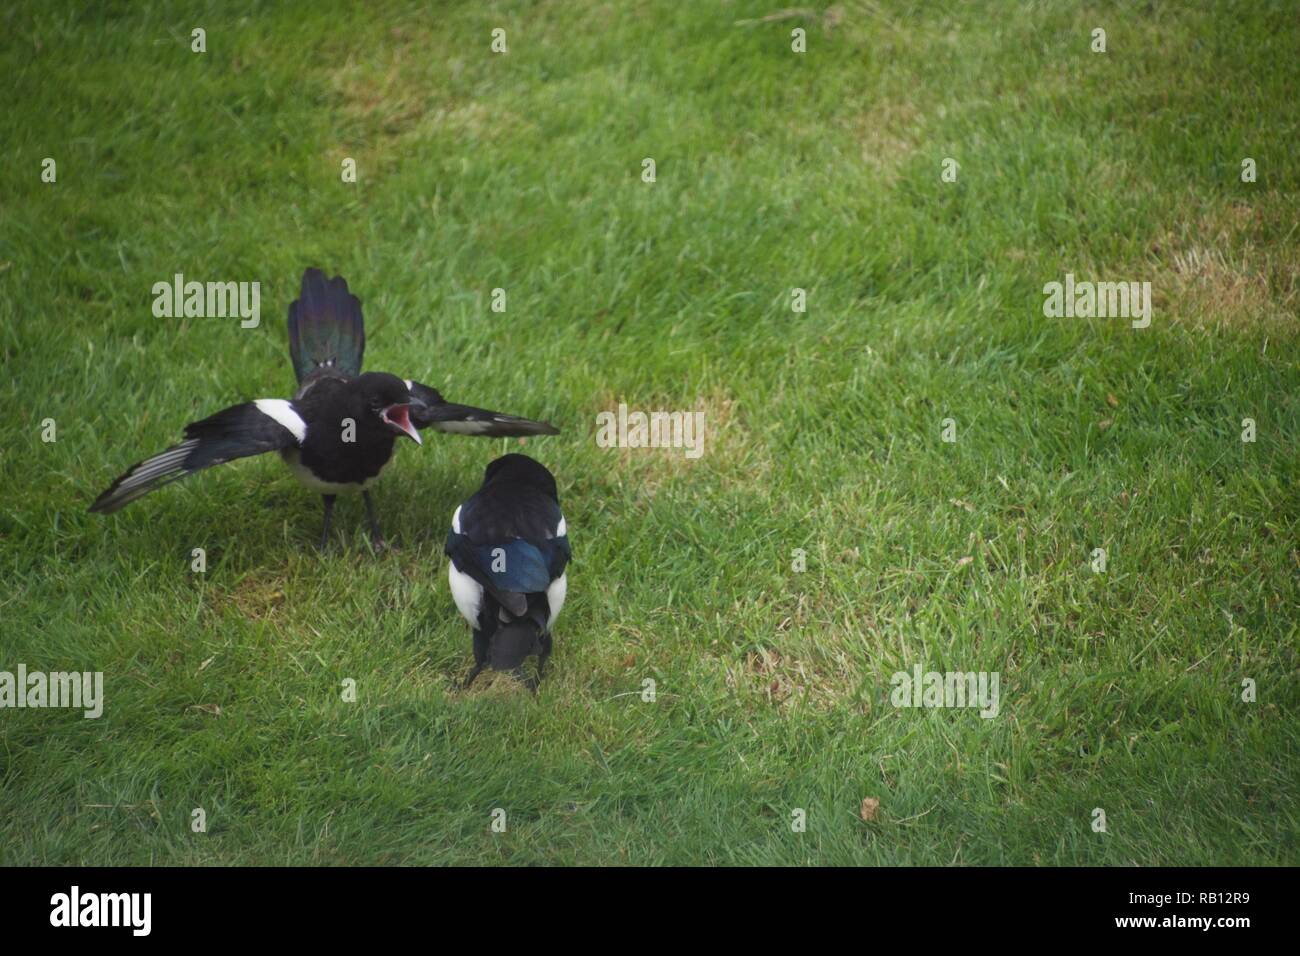 A juvenile magpie and its parent on a lawn. The parent is looking for food: worms in the grass. The young bird is squawking and flapping its wings, hu Stock Photo